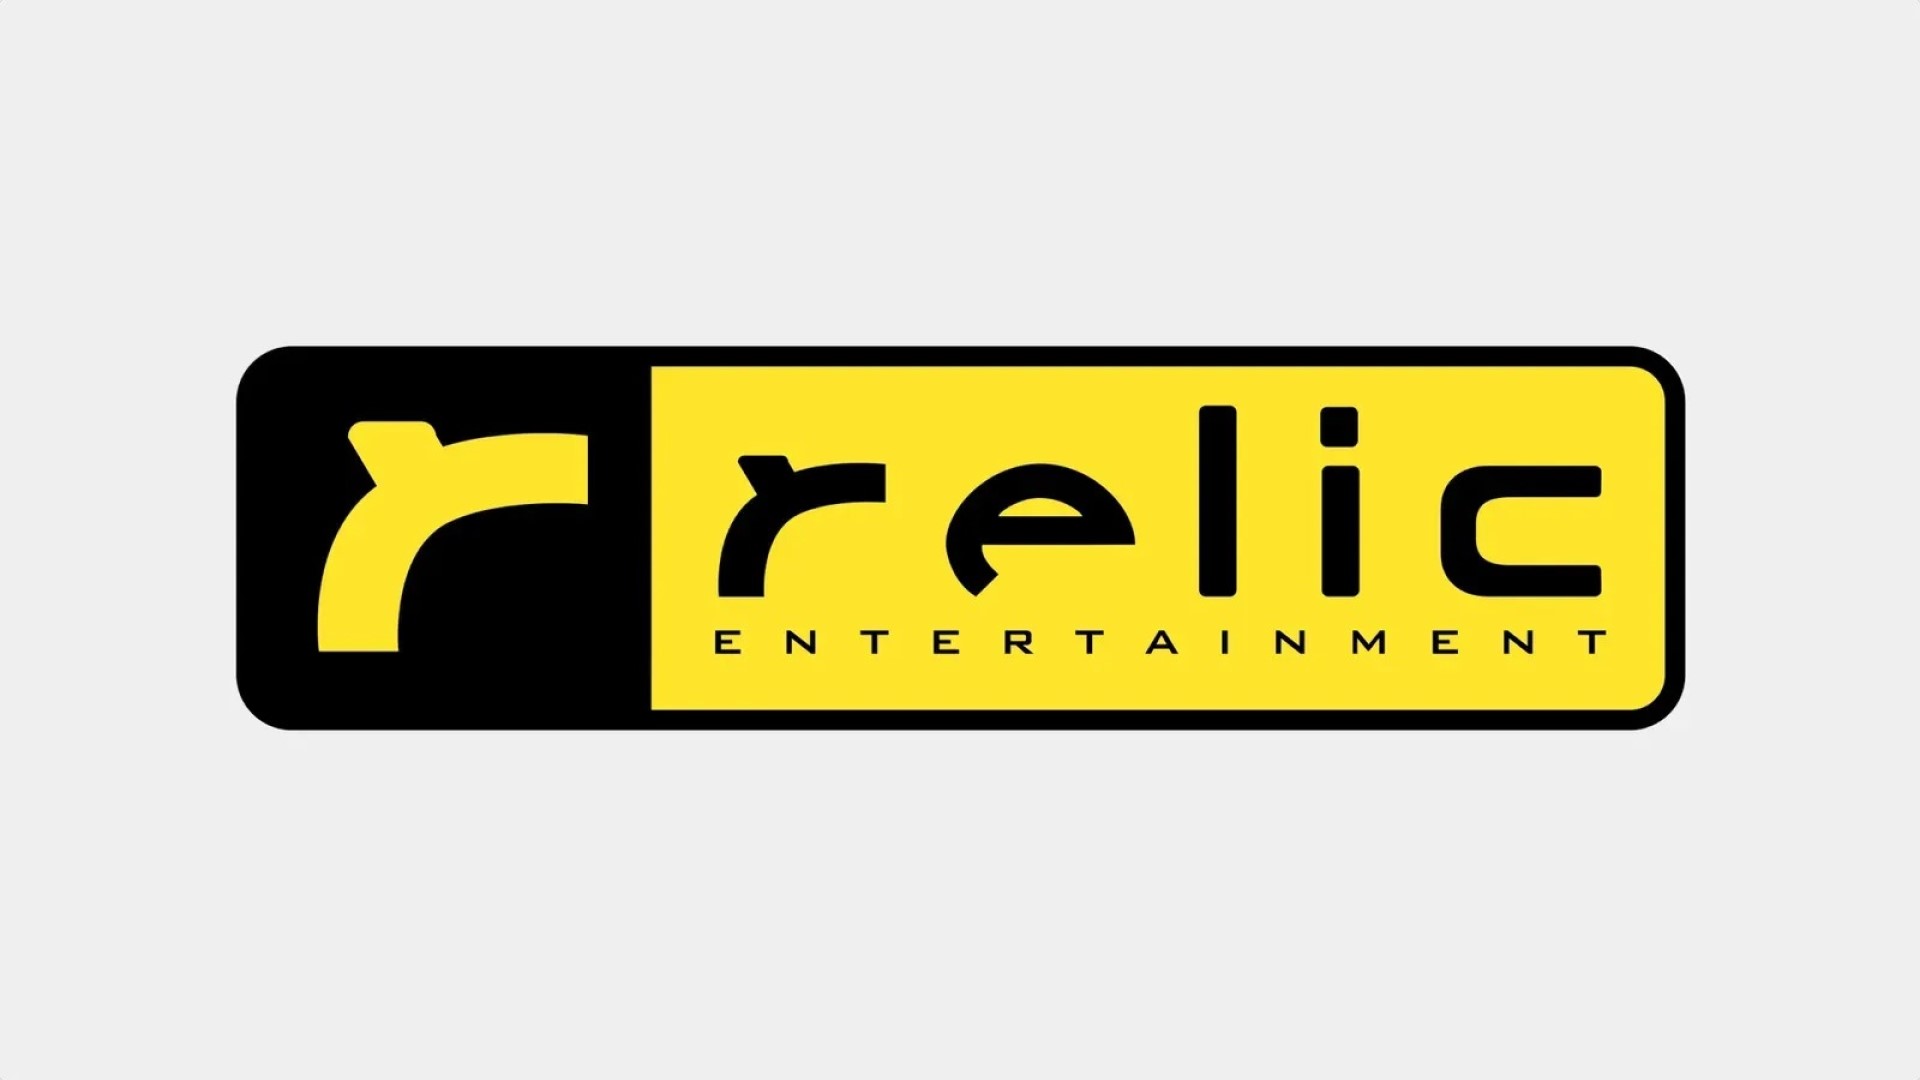 One more company has appeared on the list: Relic Entertainment announces layoffs of 41 employees